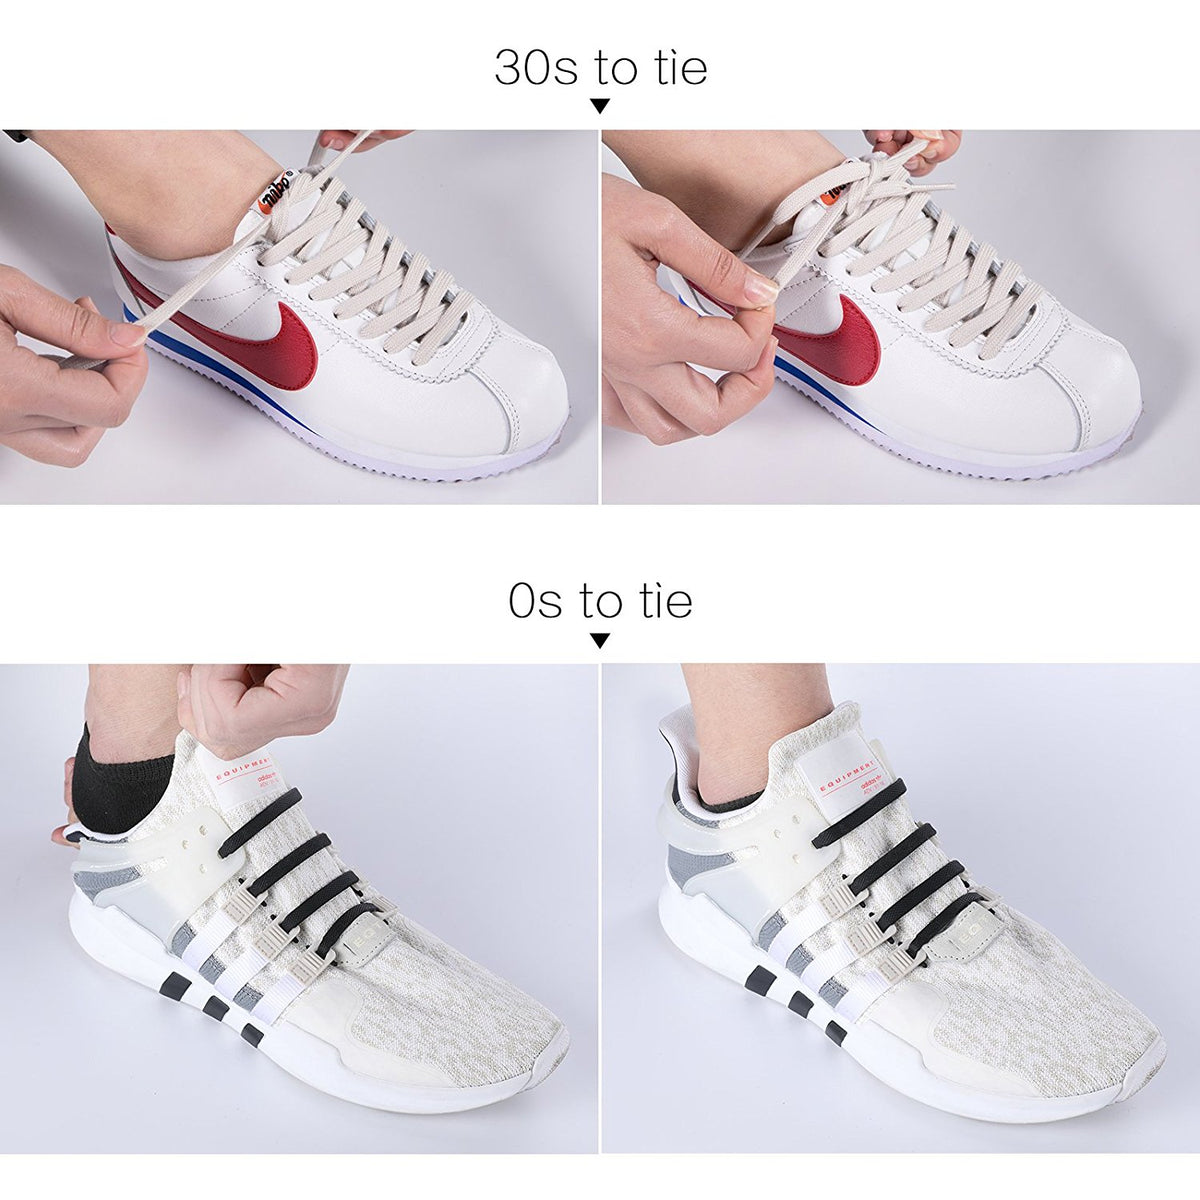 Shackcom No Tie Shoe Laces For Kids and Adults – 4 Packs, Elastic